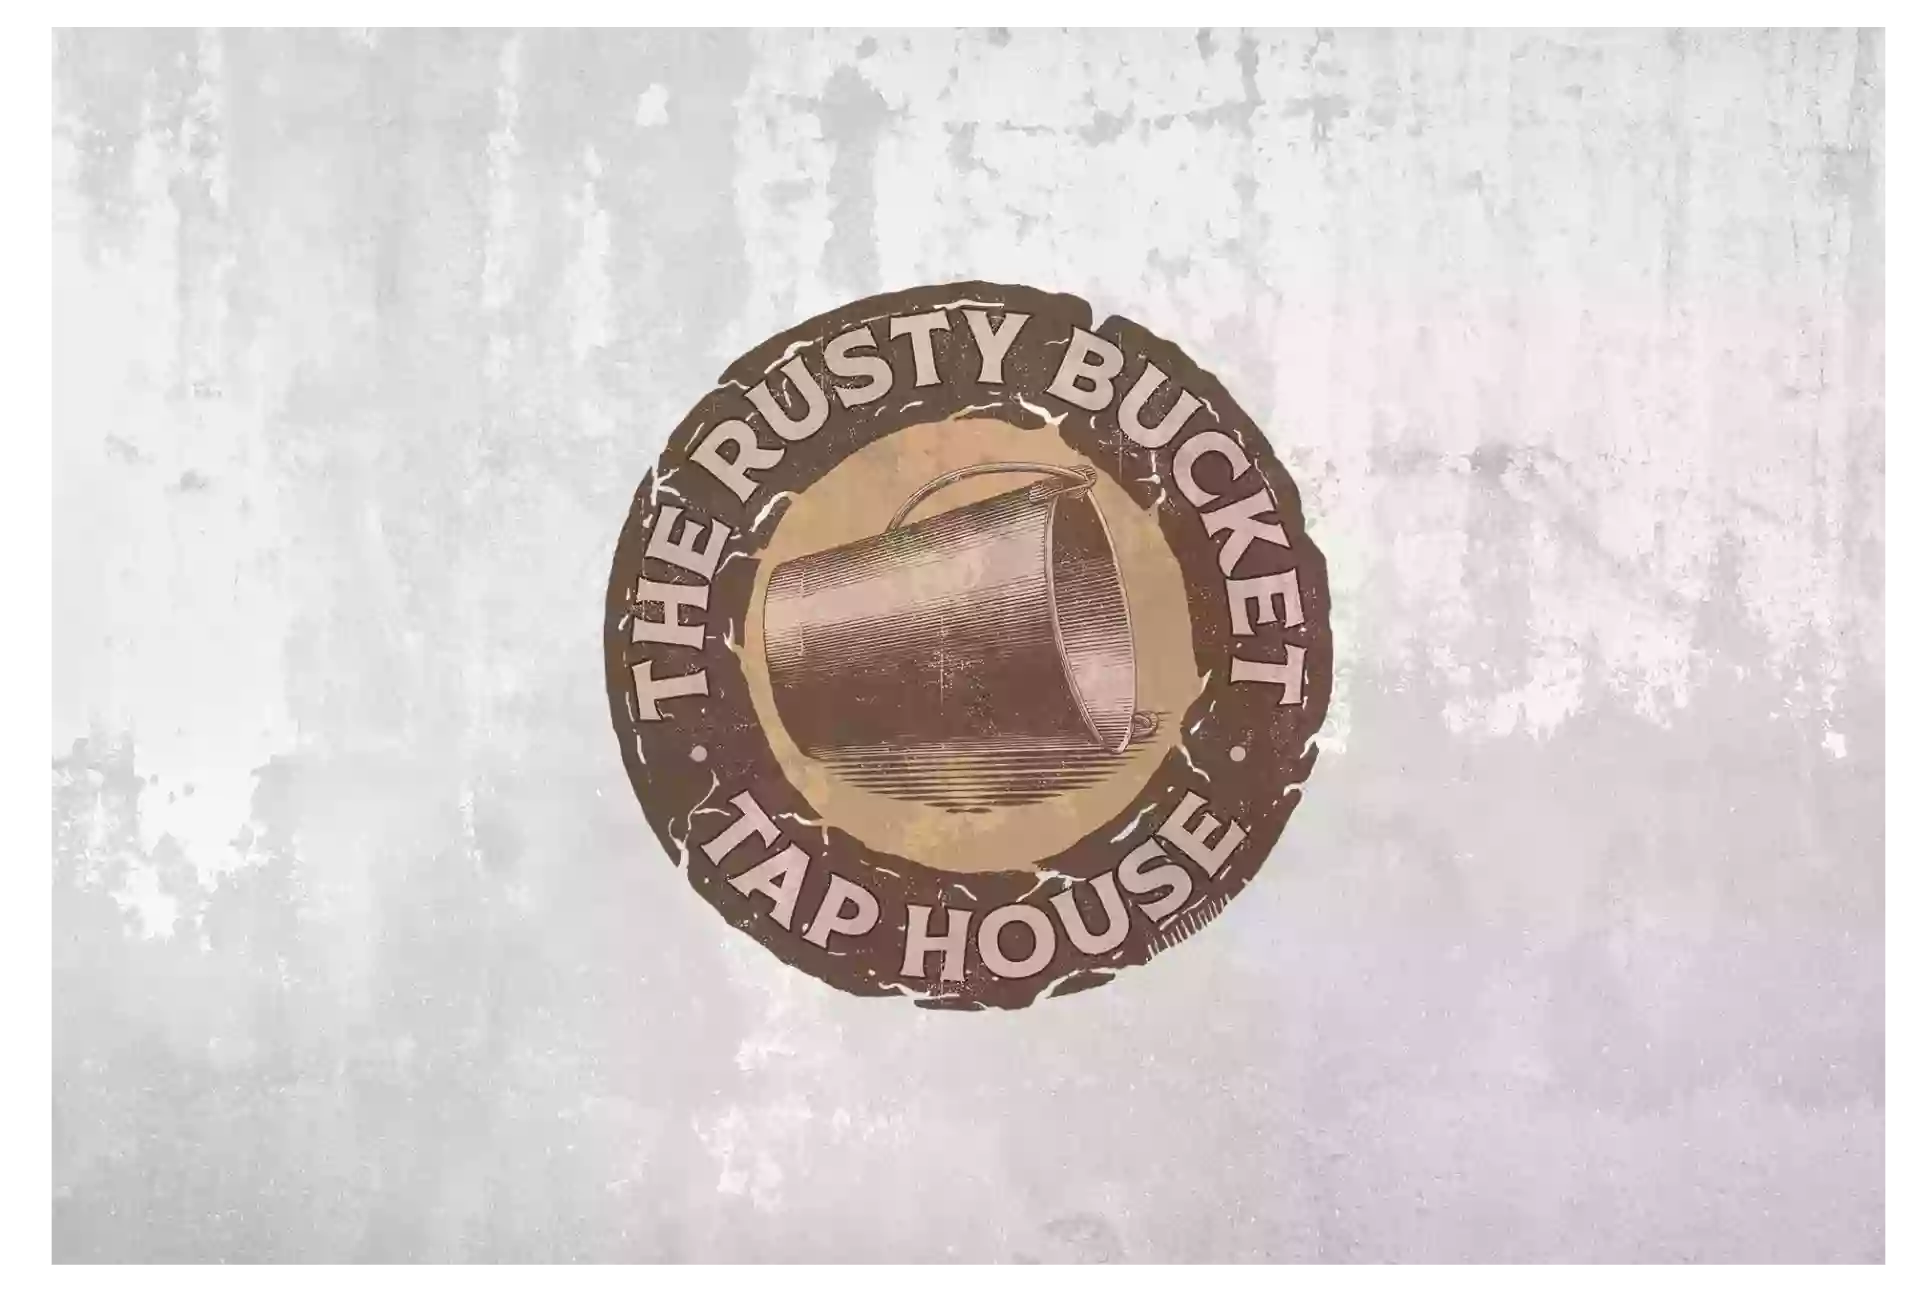 The Rusty Bucket Tap House